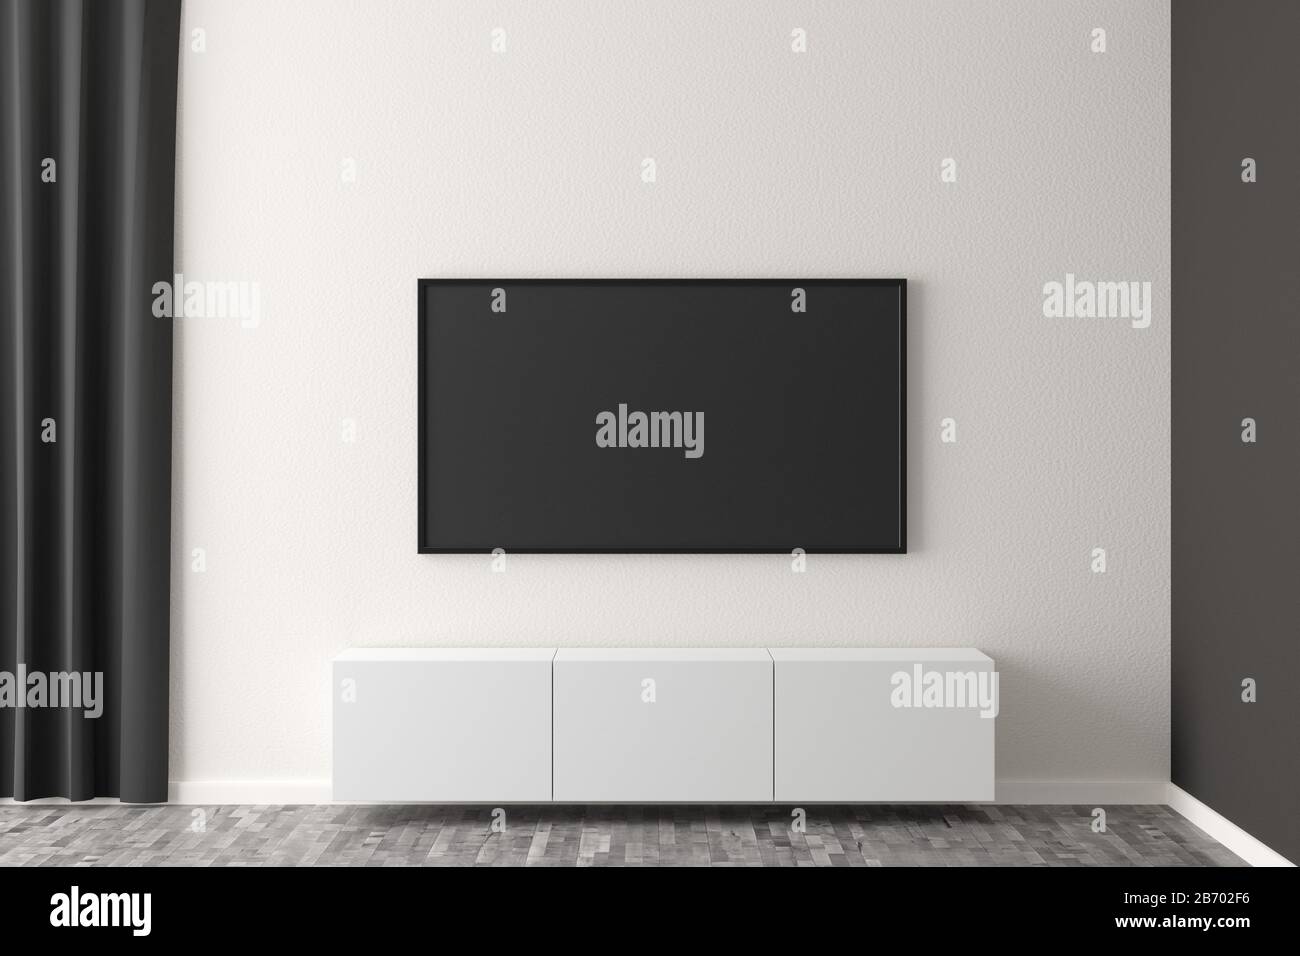 Flat smart tv panel on white wall with floating white sideboard and brown wooden floor - entertainment, media or home television set mock up template Stock Photo